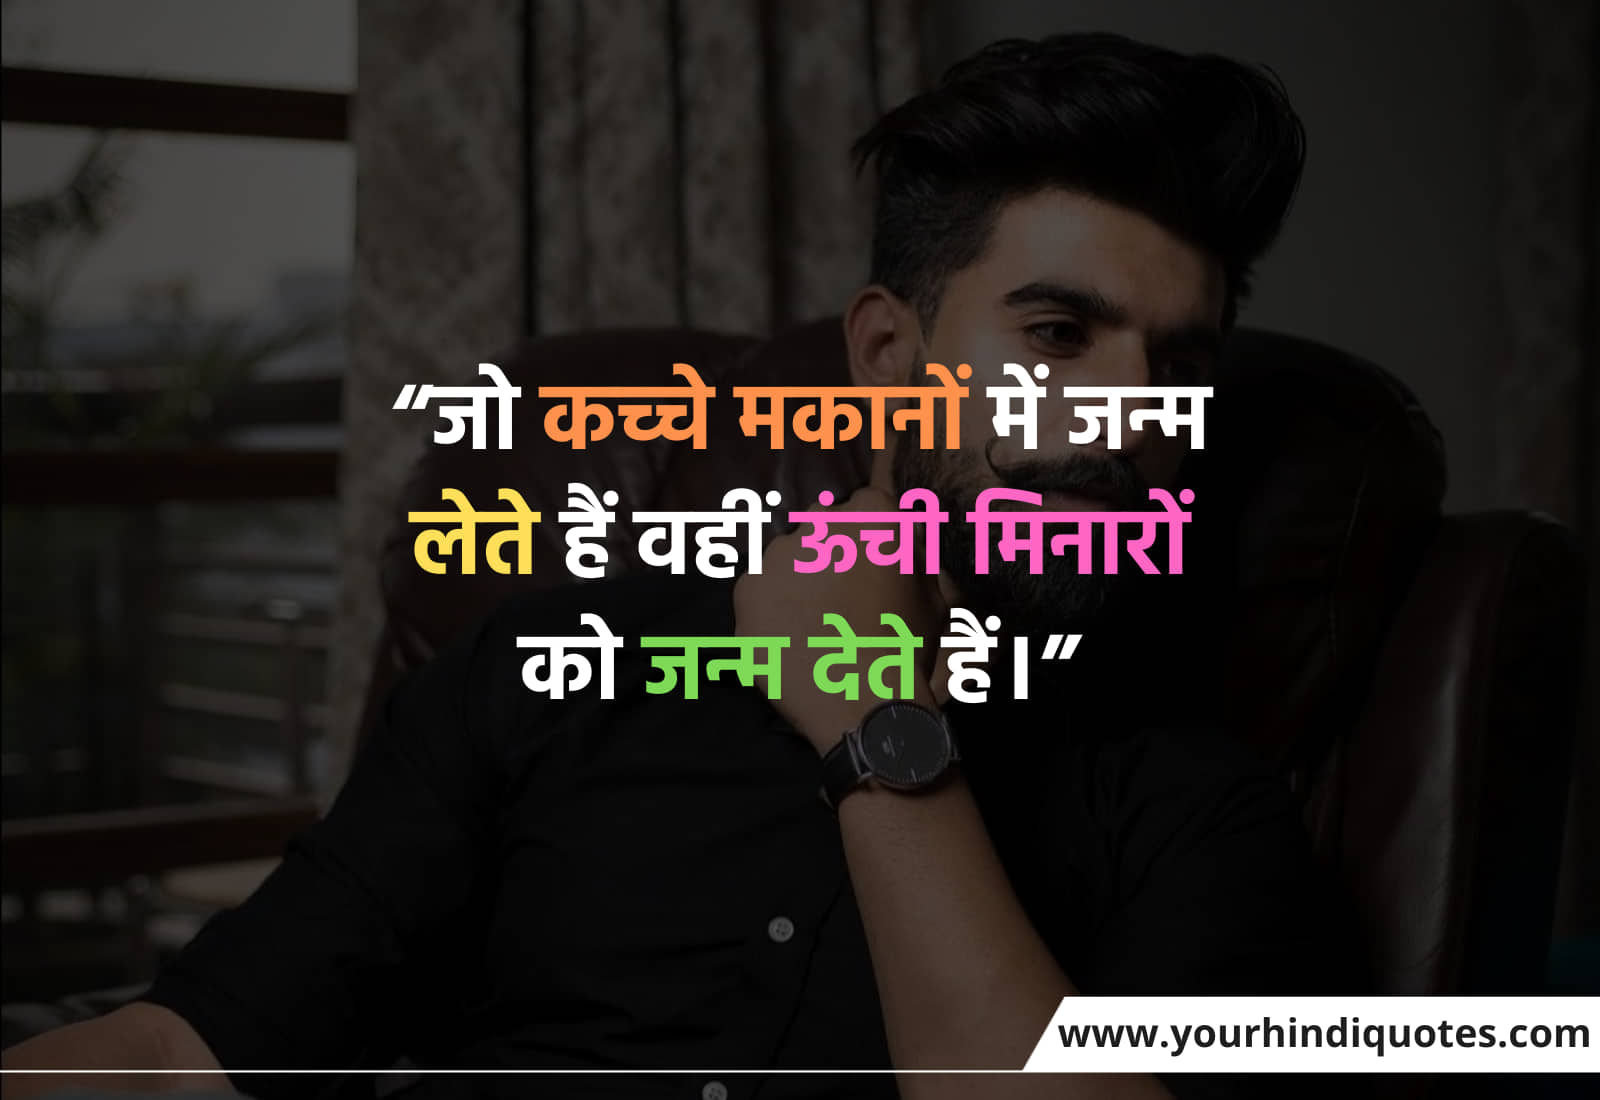 Hindi Quotes About Success